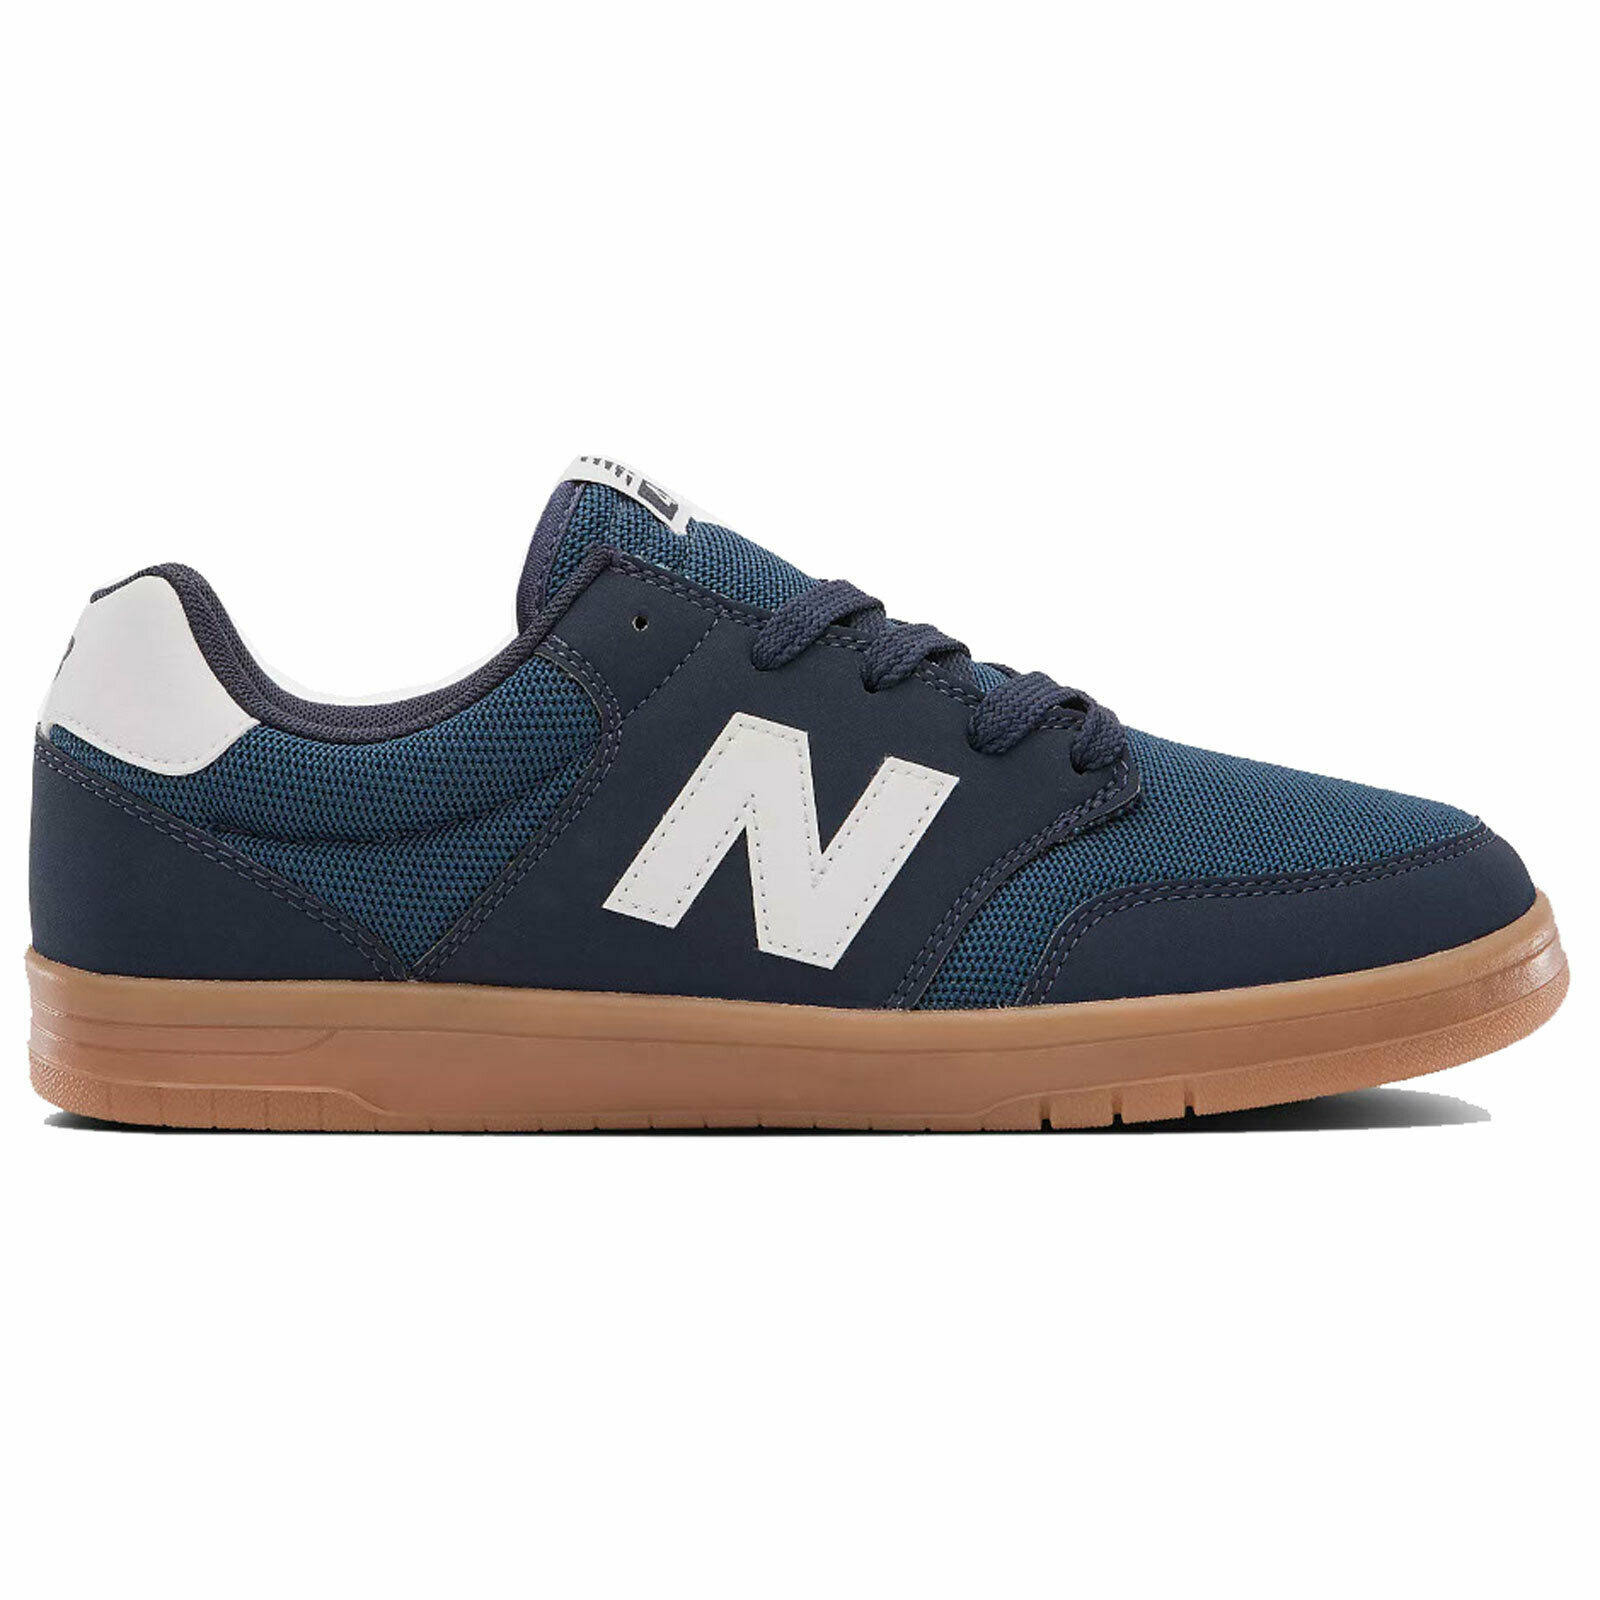 New Balance Men's AM425 Low Top Sneaker Shoes Navy with Natural Indigo Footwe